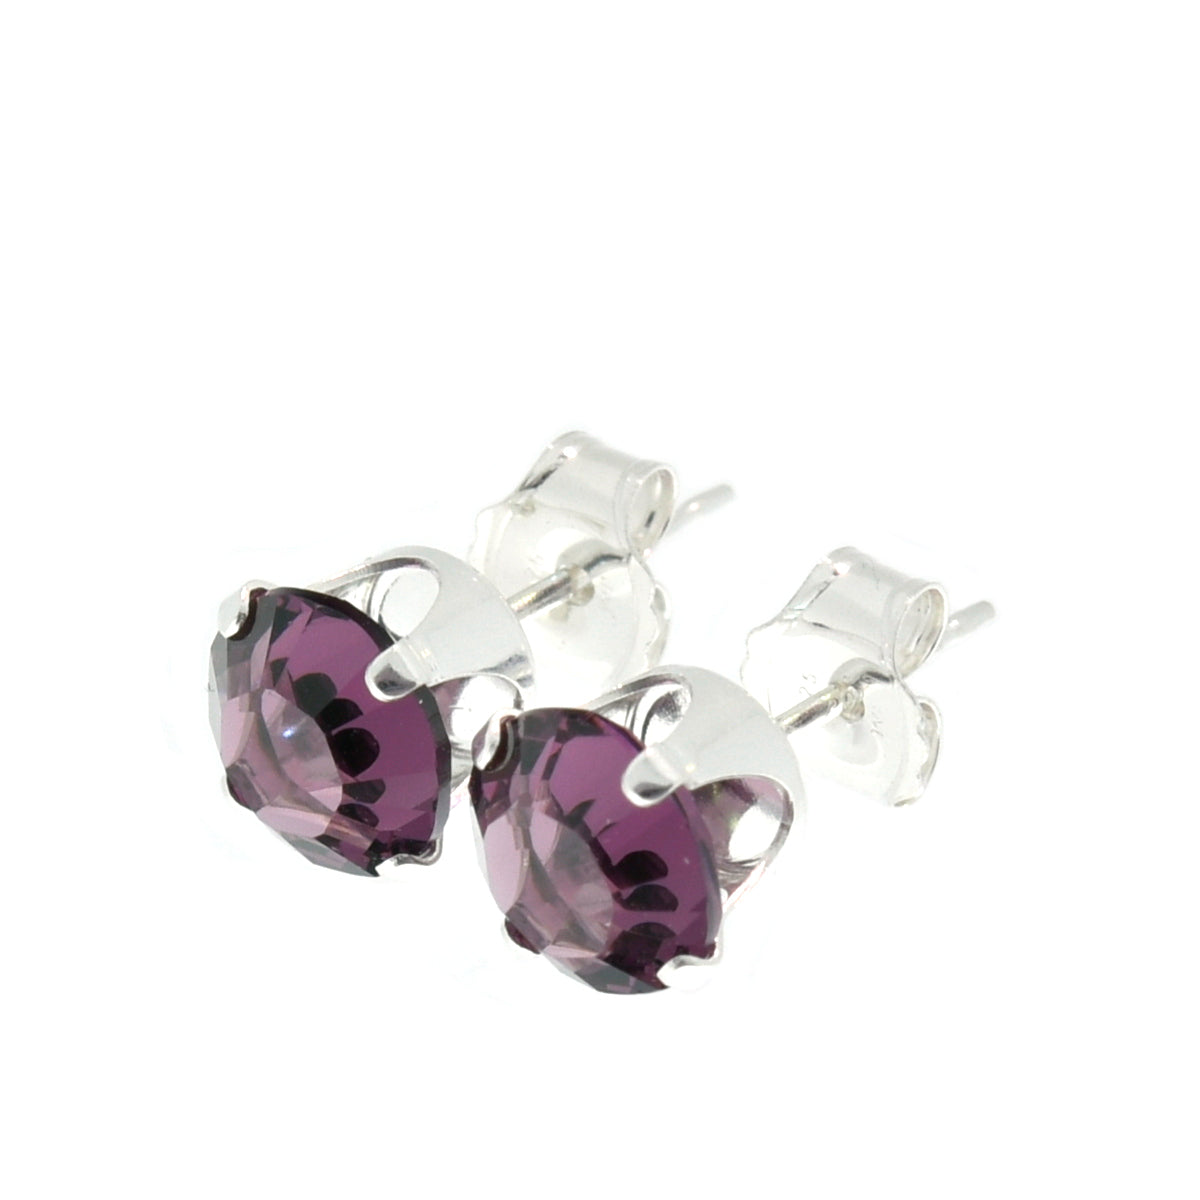 pewterhooter® Women's Classic Collection 925 Sterling silver earrings with sparkling Amethyst channel crystals, packaged in a gift box for any occasion.